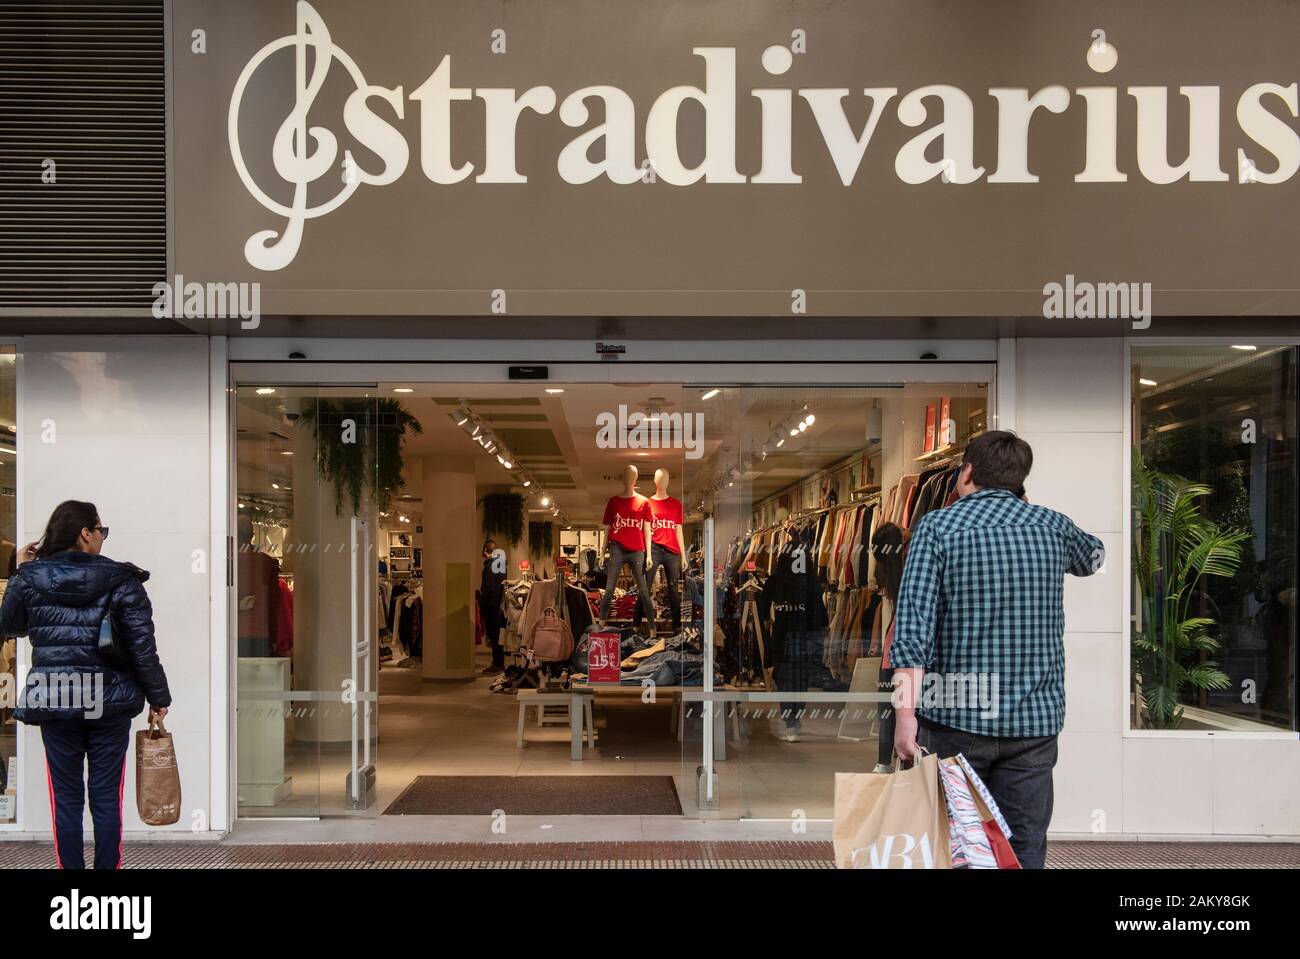 Stradivarius Store High Resolution Stock Photography and Images - Alamy